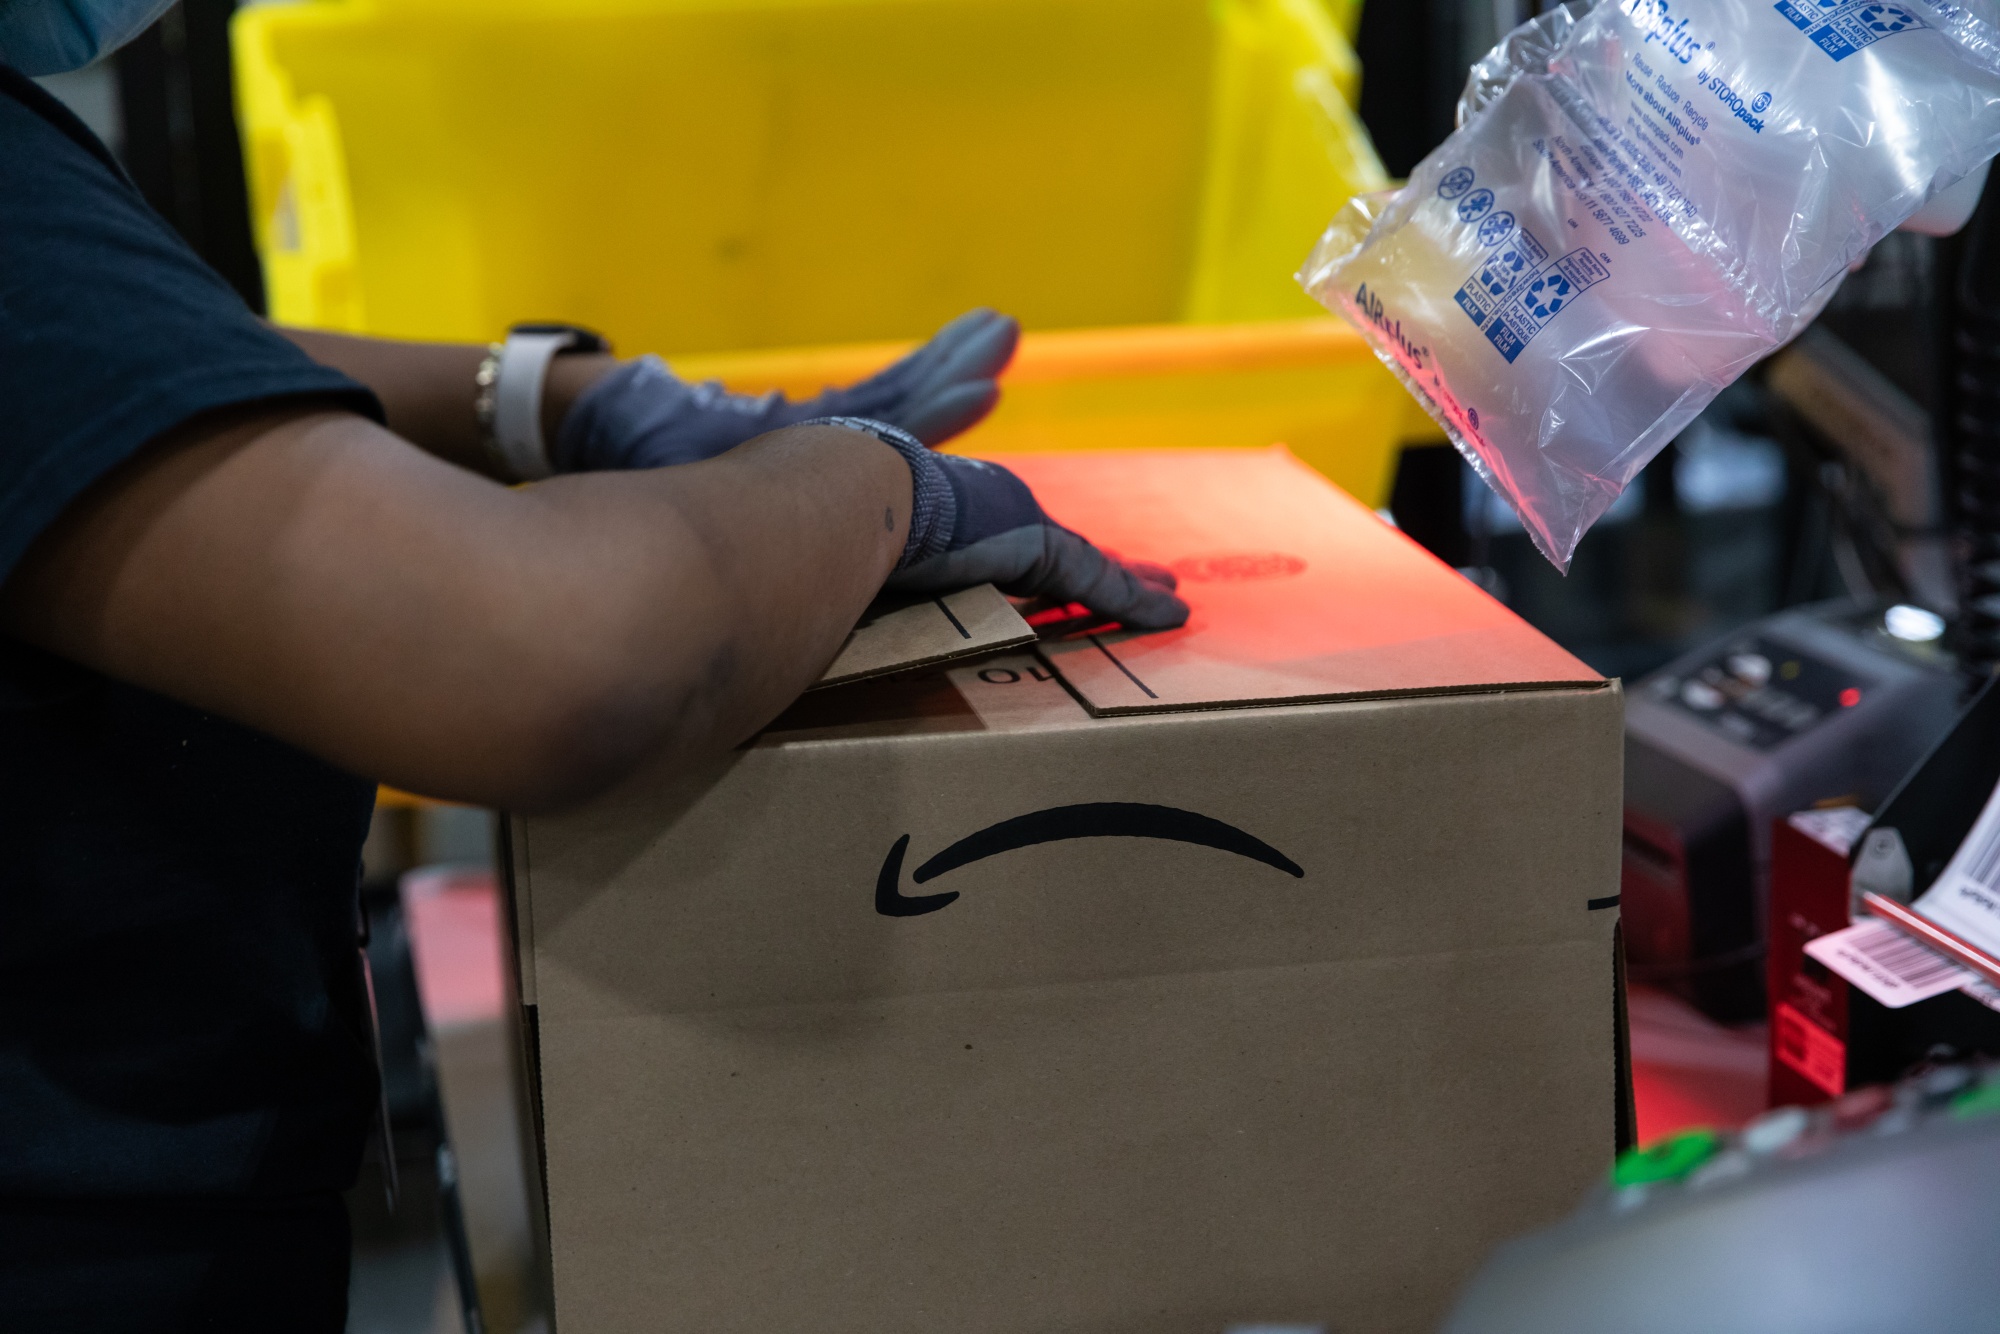 A worker assembles a box at an Amazon fulfillment center in Raleigh, North Carolina.